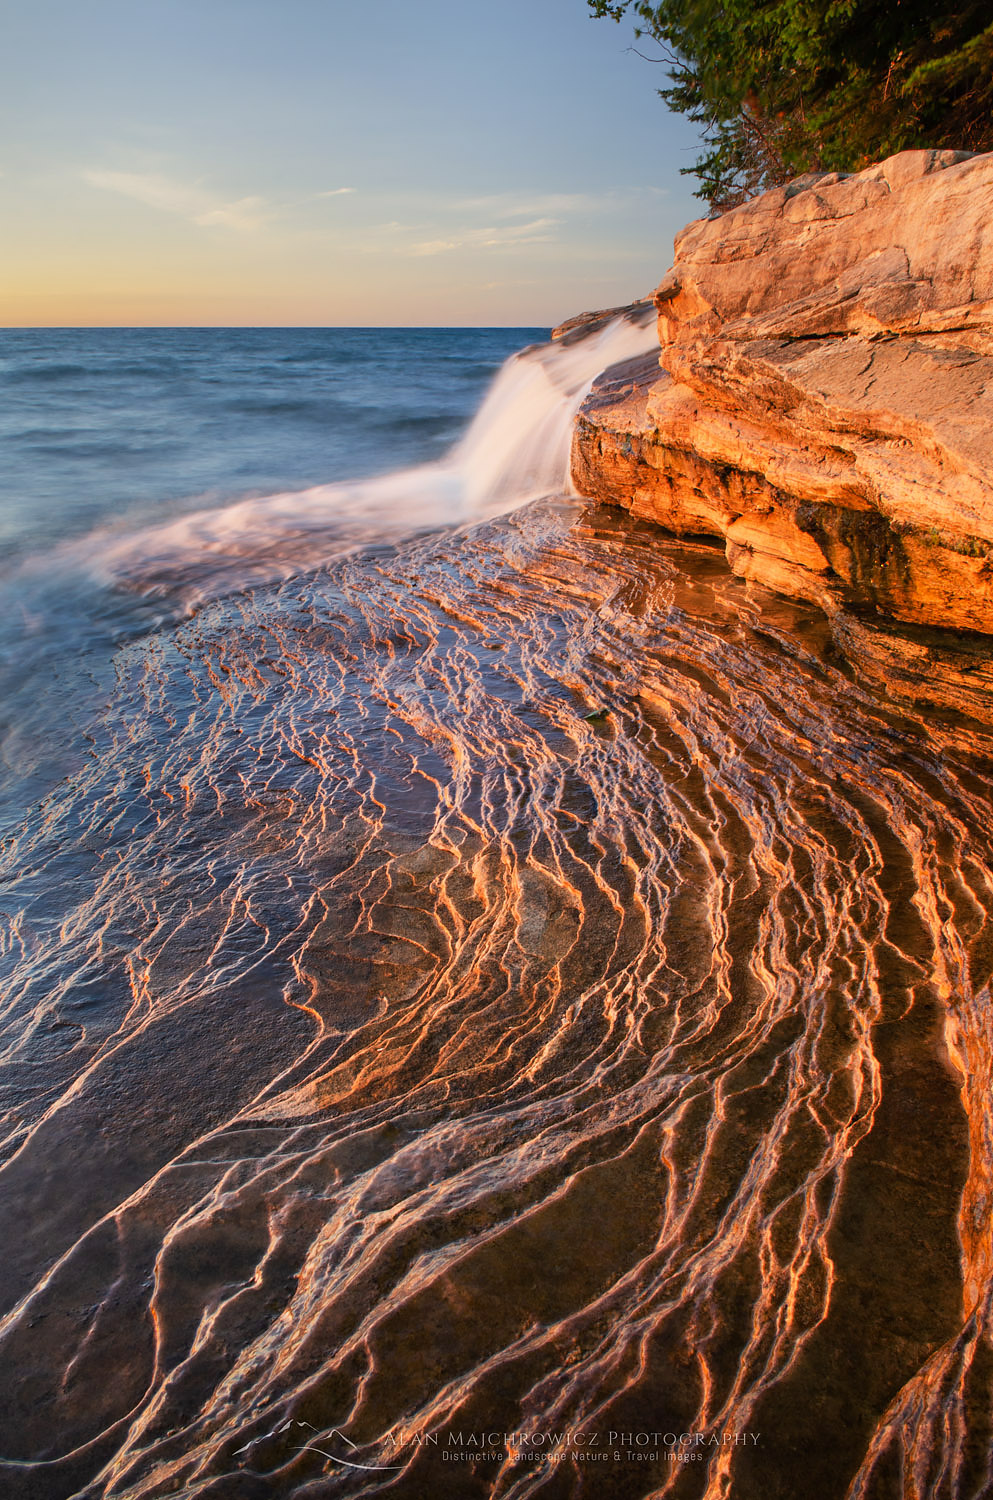 Elliot Falls flowing over layers of Au Train Formation sandstone at Miners Beach. Pictured Rocks National Lakeshore Michigan #63933